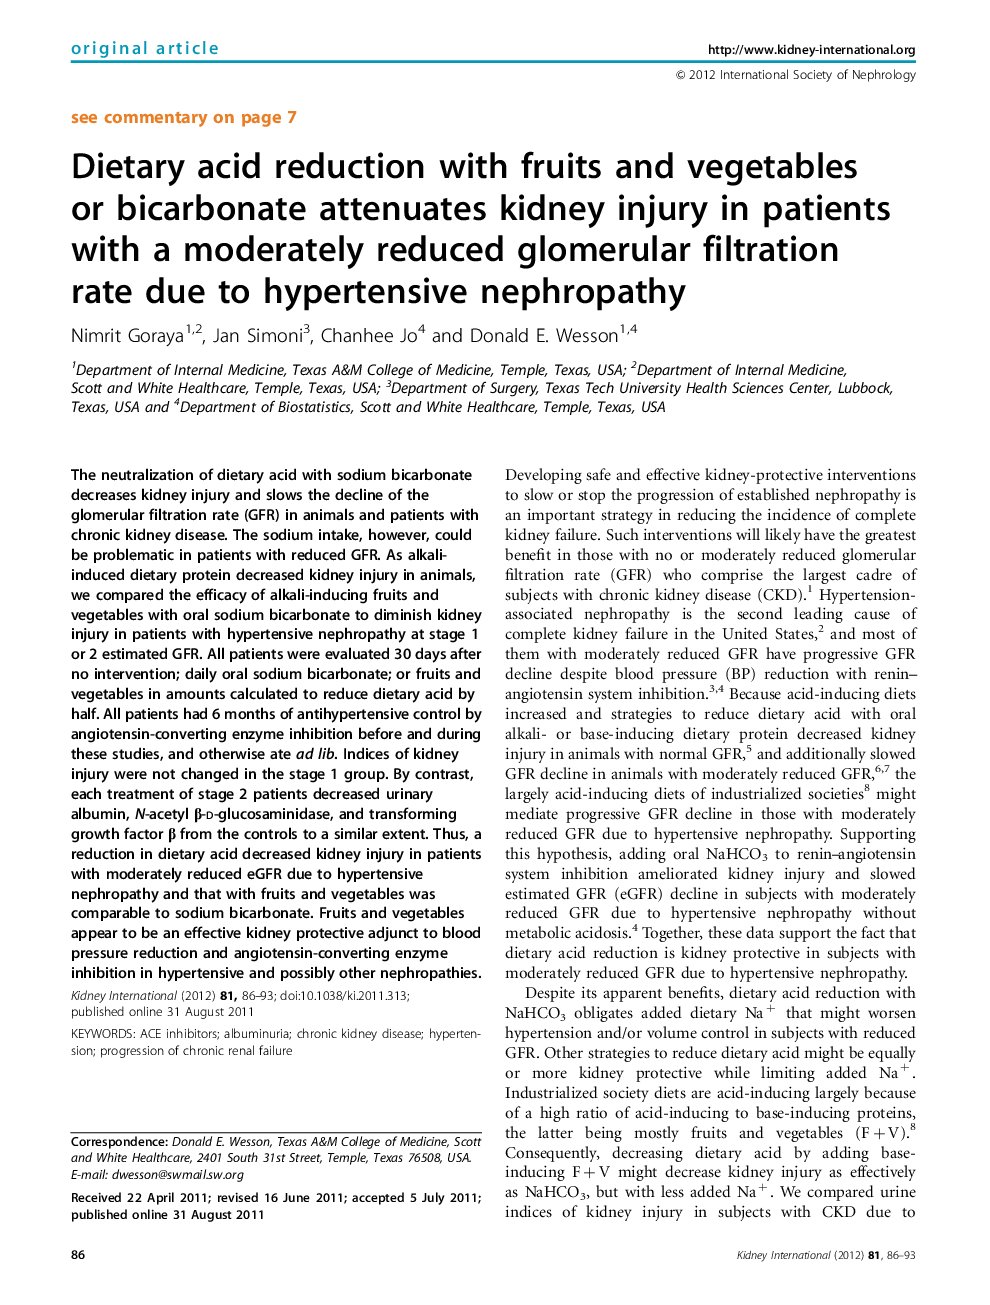 Dietary acid reduction with fruits and vegetables or bicarbonate attenuates kidney injury in patients with a moderately reduced glomerular filtration rate due to hypertensive nephropathy 